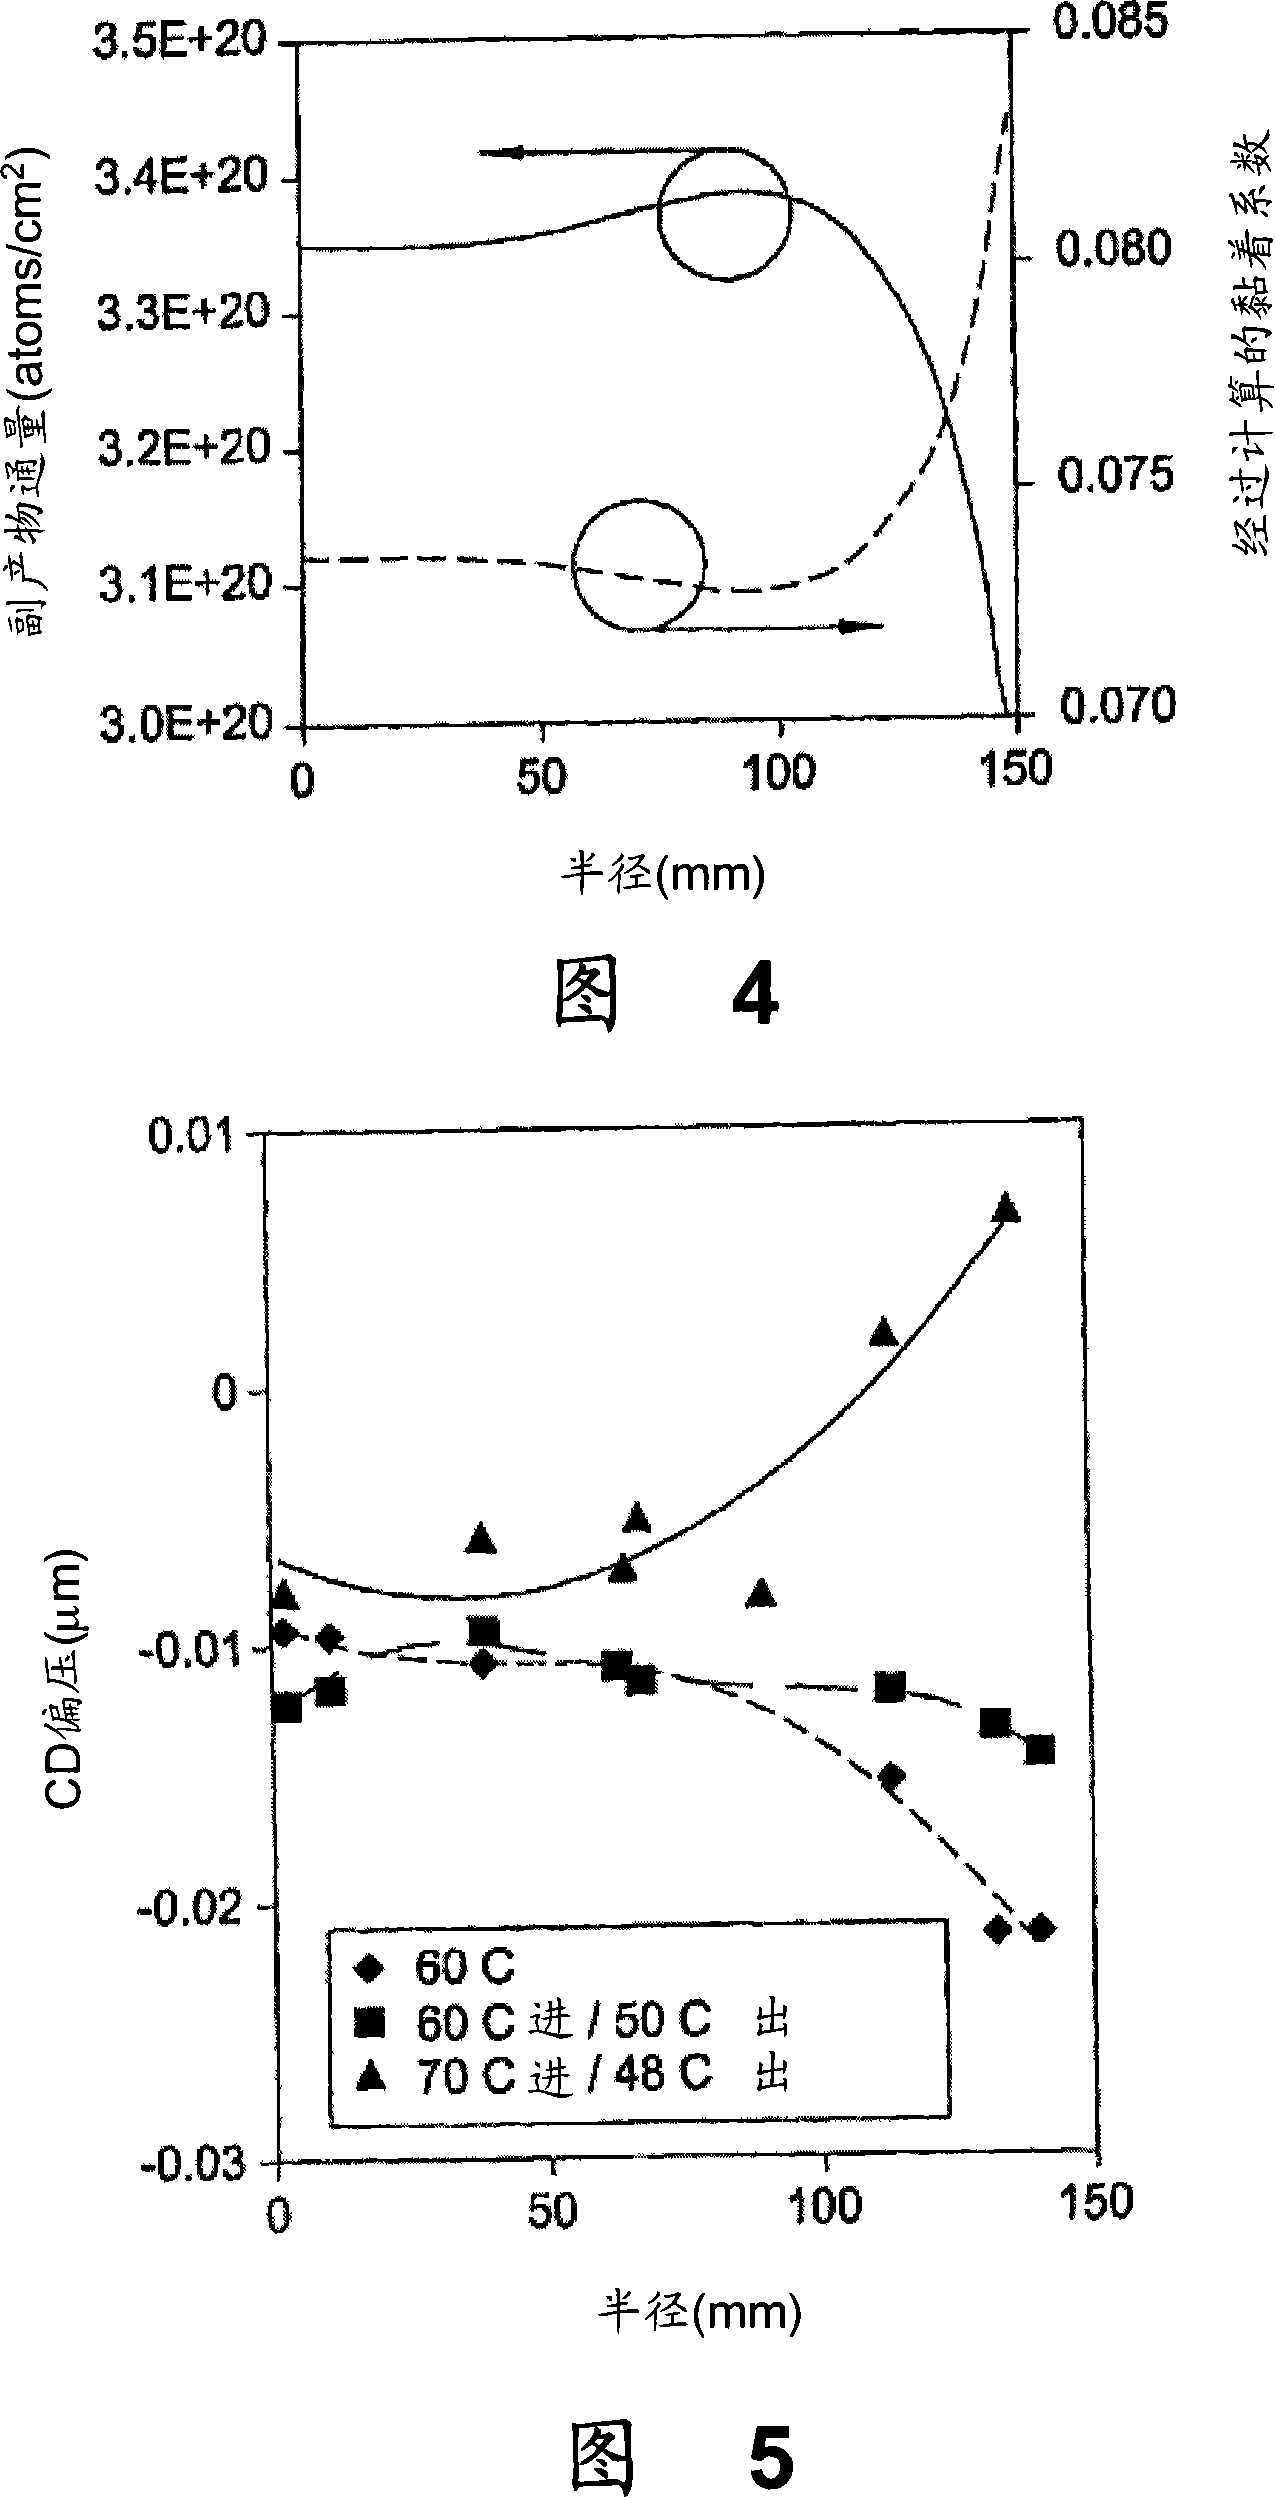 Method for etching having a controlled distribution of process results